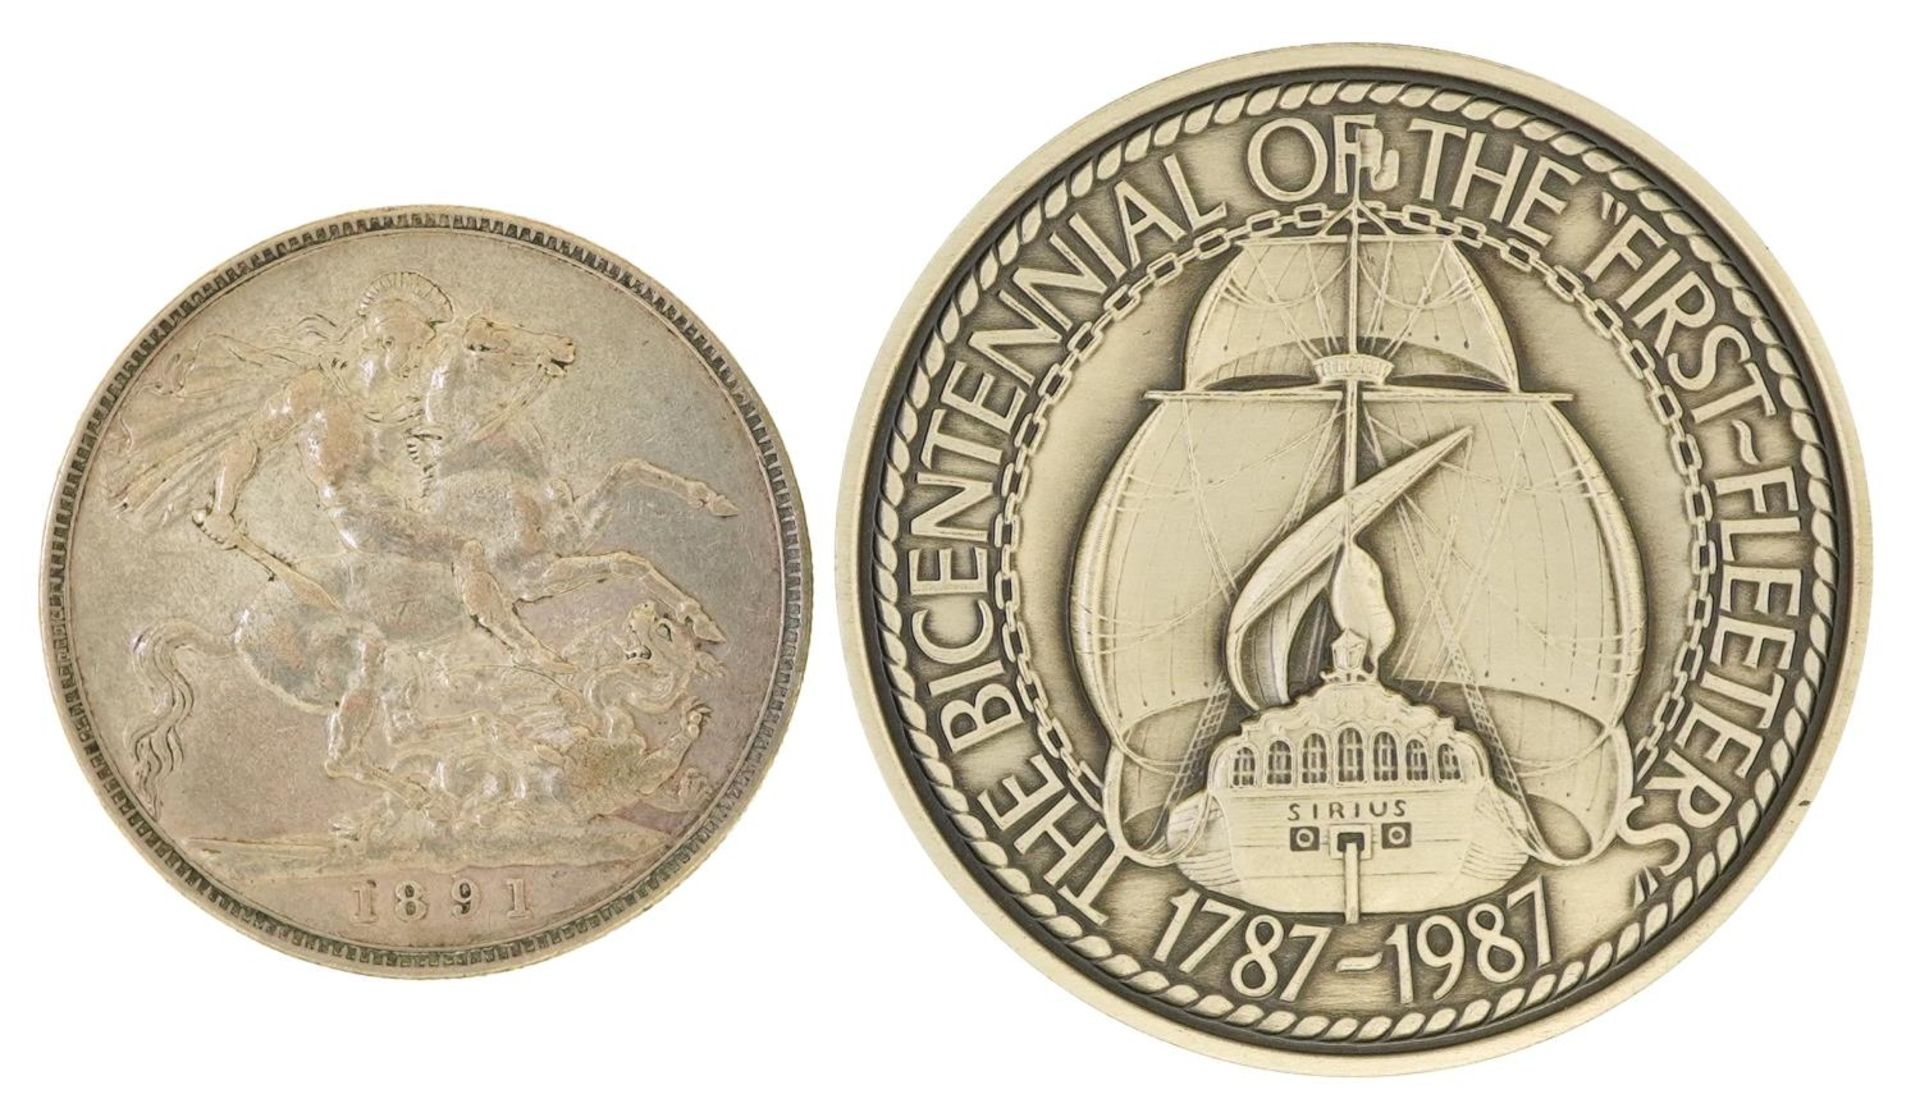 Queen Victoria 1891 silver crown and a silver medallion commemorating the Bicentennial of the - Image 2 of 6